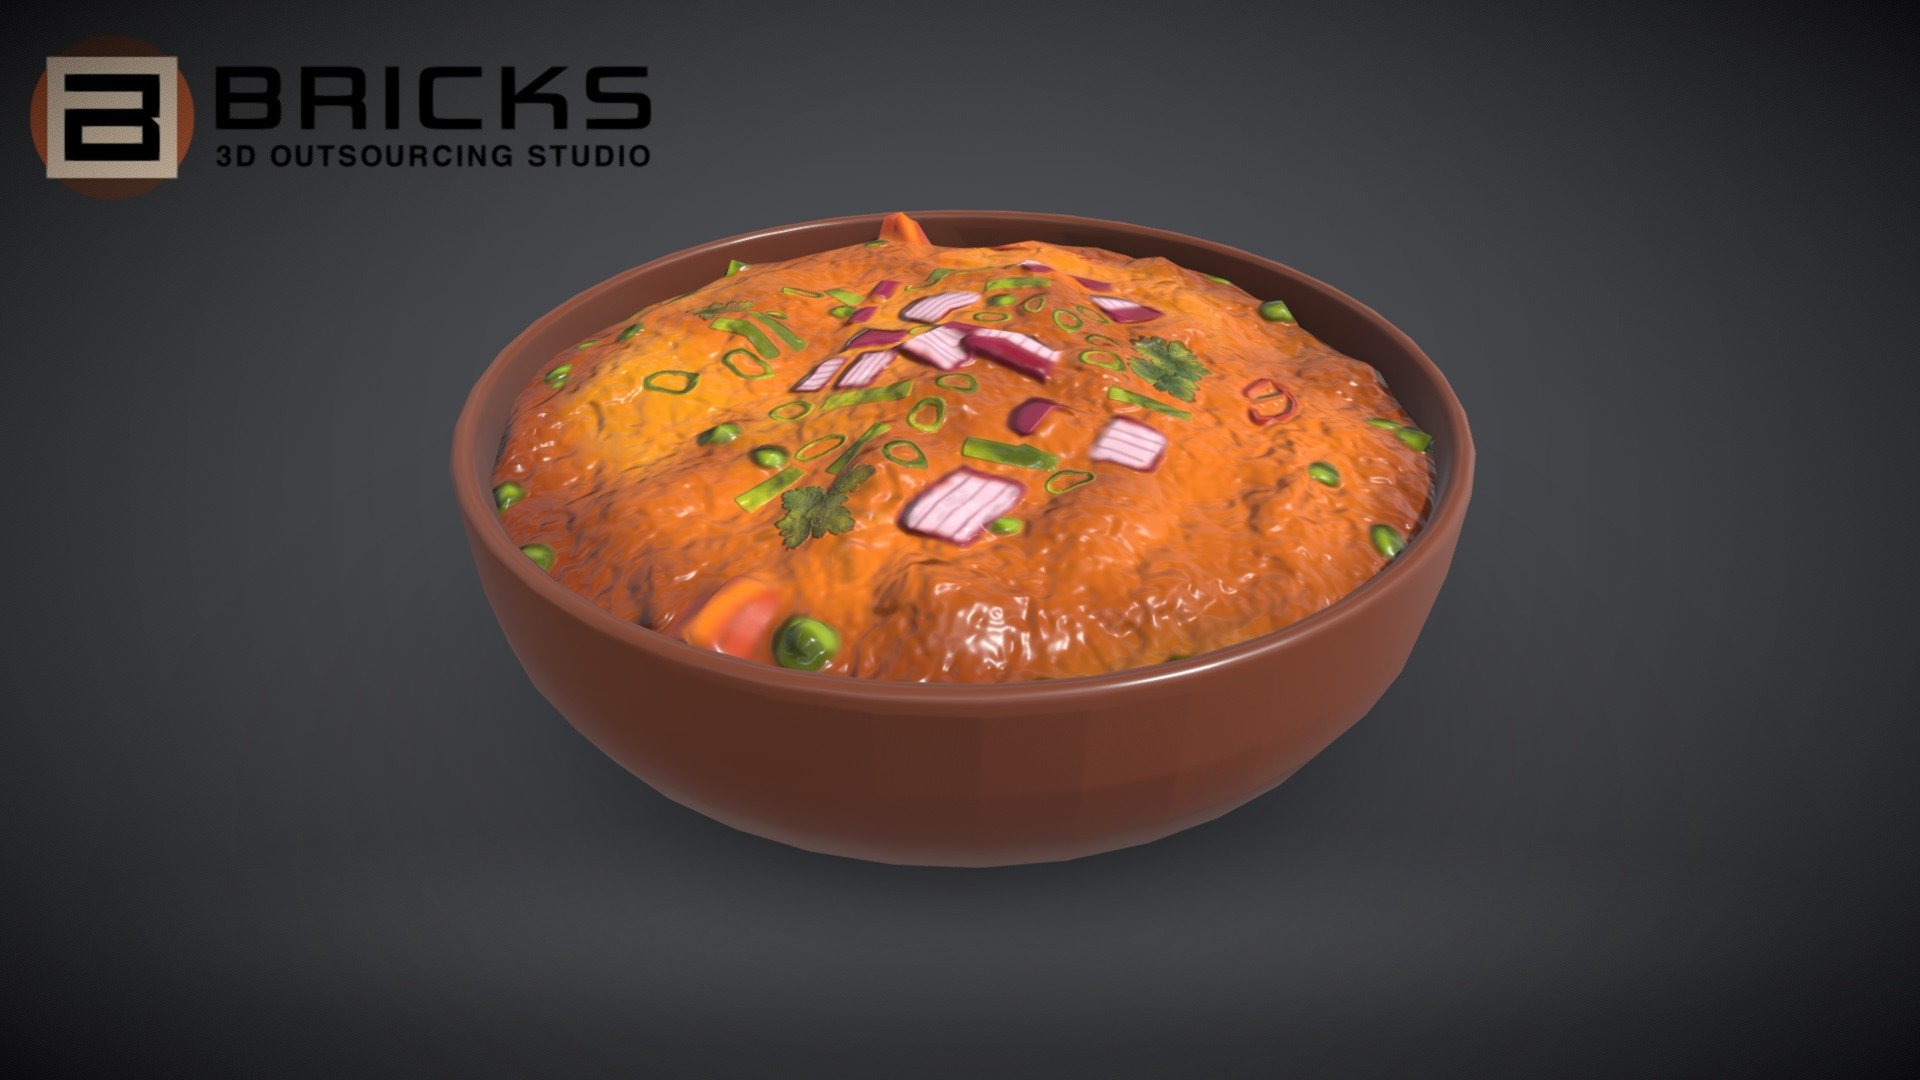 PBR Food Asset:
Pav Bhaji
Polycount: 2136
Vertex count: 1104
Texture Size: 2048px x 2048px
Normal: OpenGL

If you need any adjust in file please contact us: team@bricks3dstudio.com

Hire us: tringuyen@bricks3dstudio.com
Here is us: https://www.bricks3dstudio.com/
        https://www.artstation.com/bricksstudio
        https://www.facebook.com/Bricks3dstudio/
        https://www.linkedin.com/in/bricks-studio-b10462252/ - PBR Food Asset: Pav Bhaji - Buy Royalty Free 3D model by Bricks Studio (@bricks3dstudio) 3d model